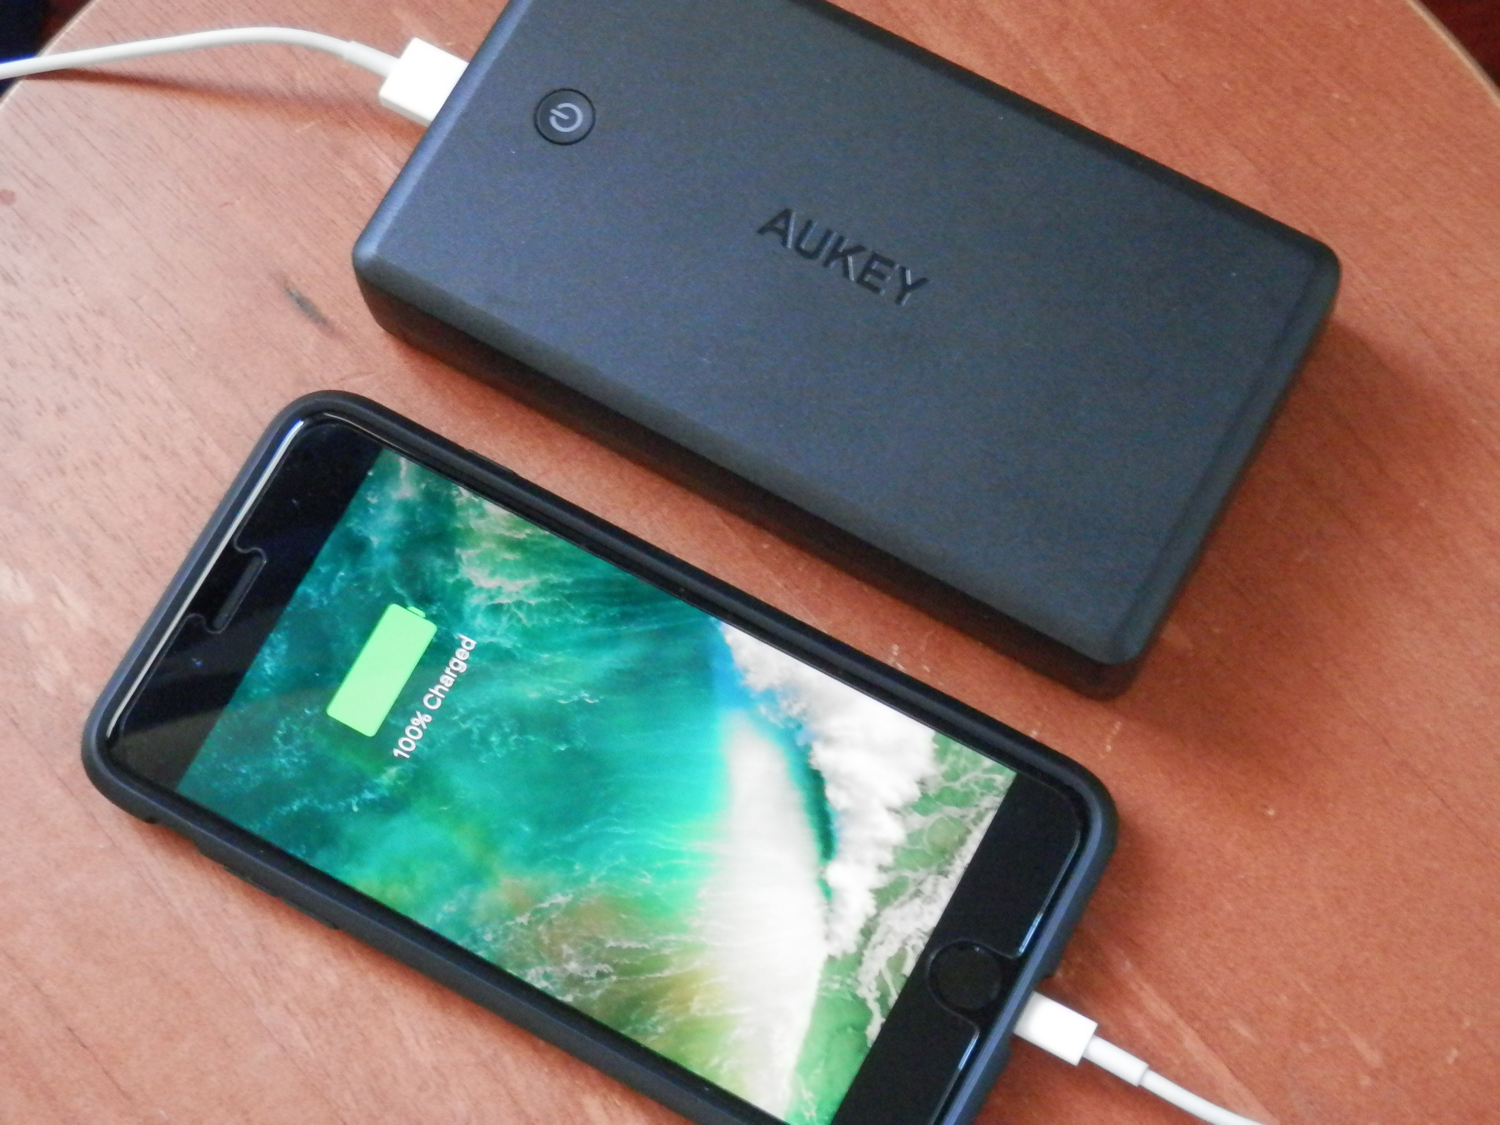 Aukey 30000 mah battery pack with iPhone